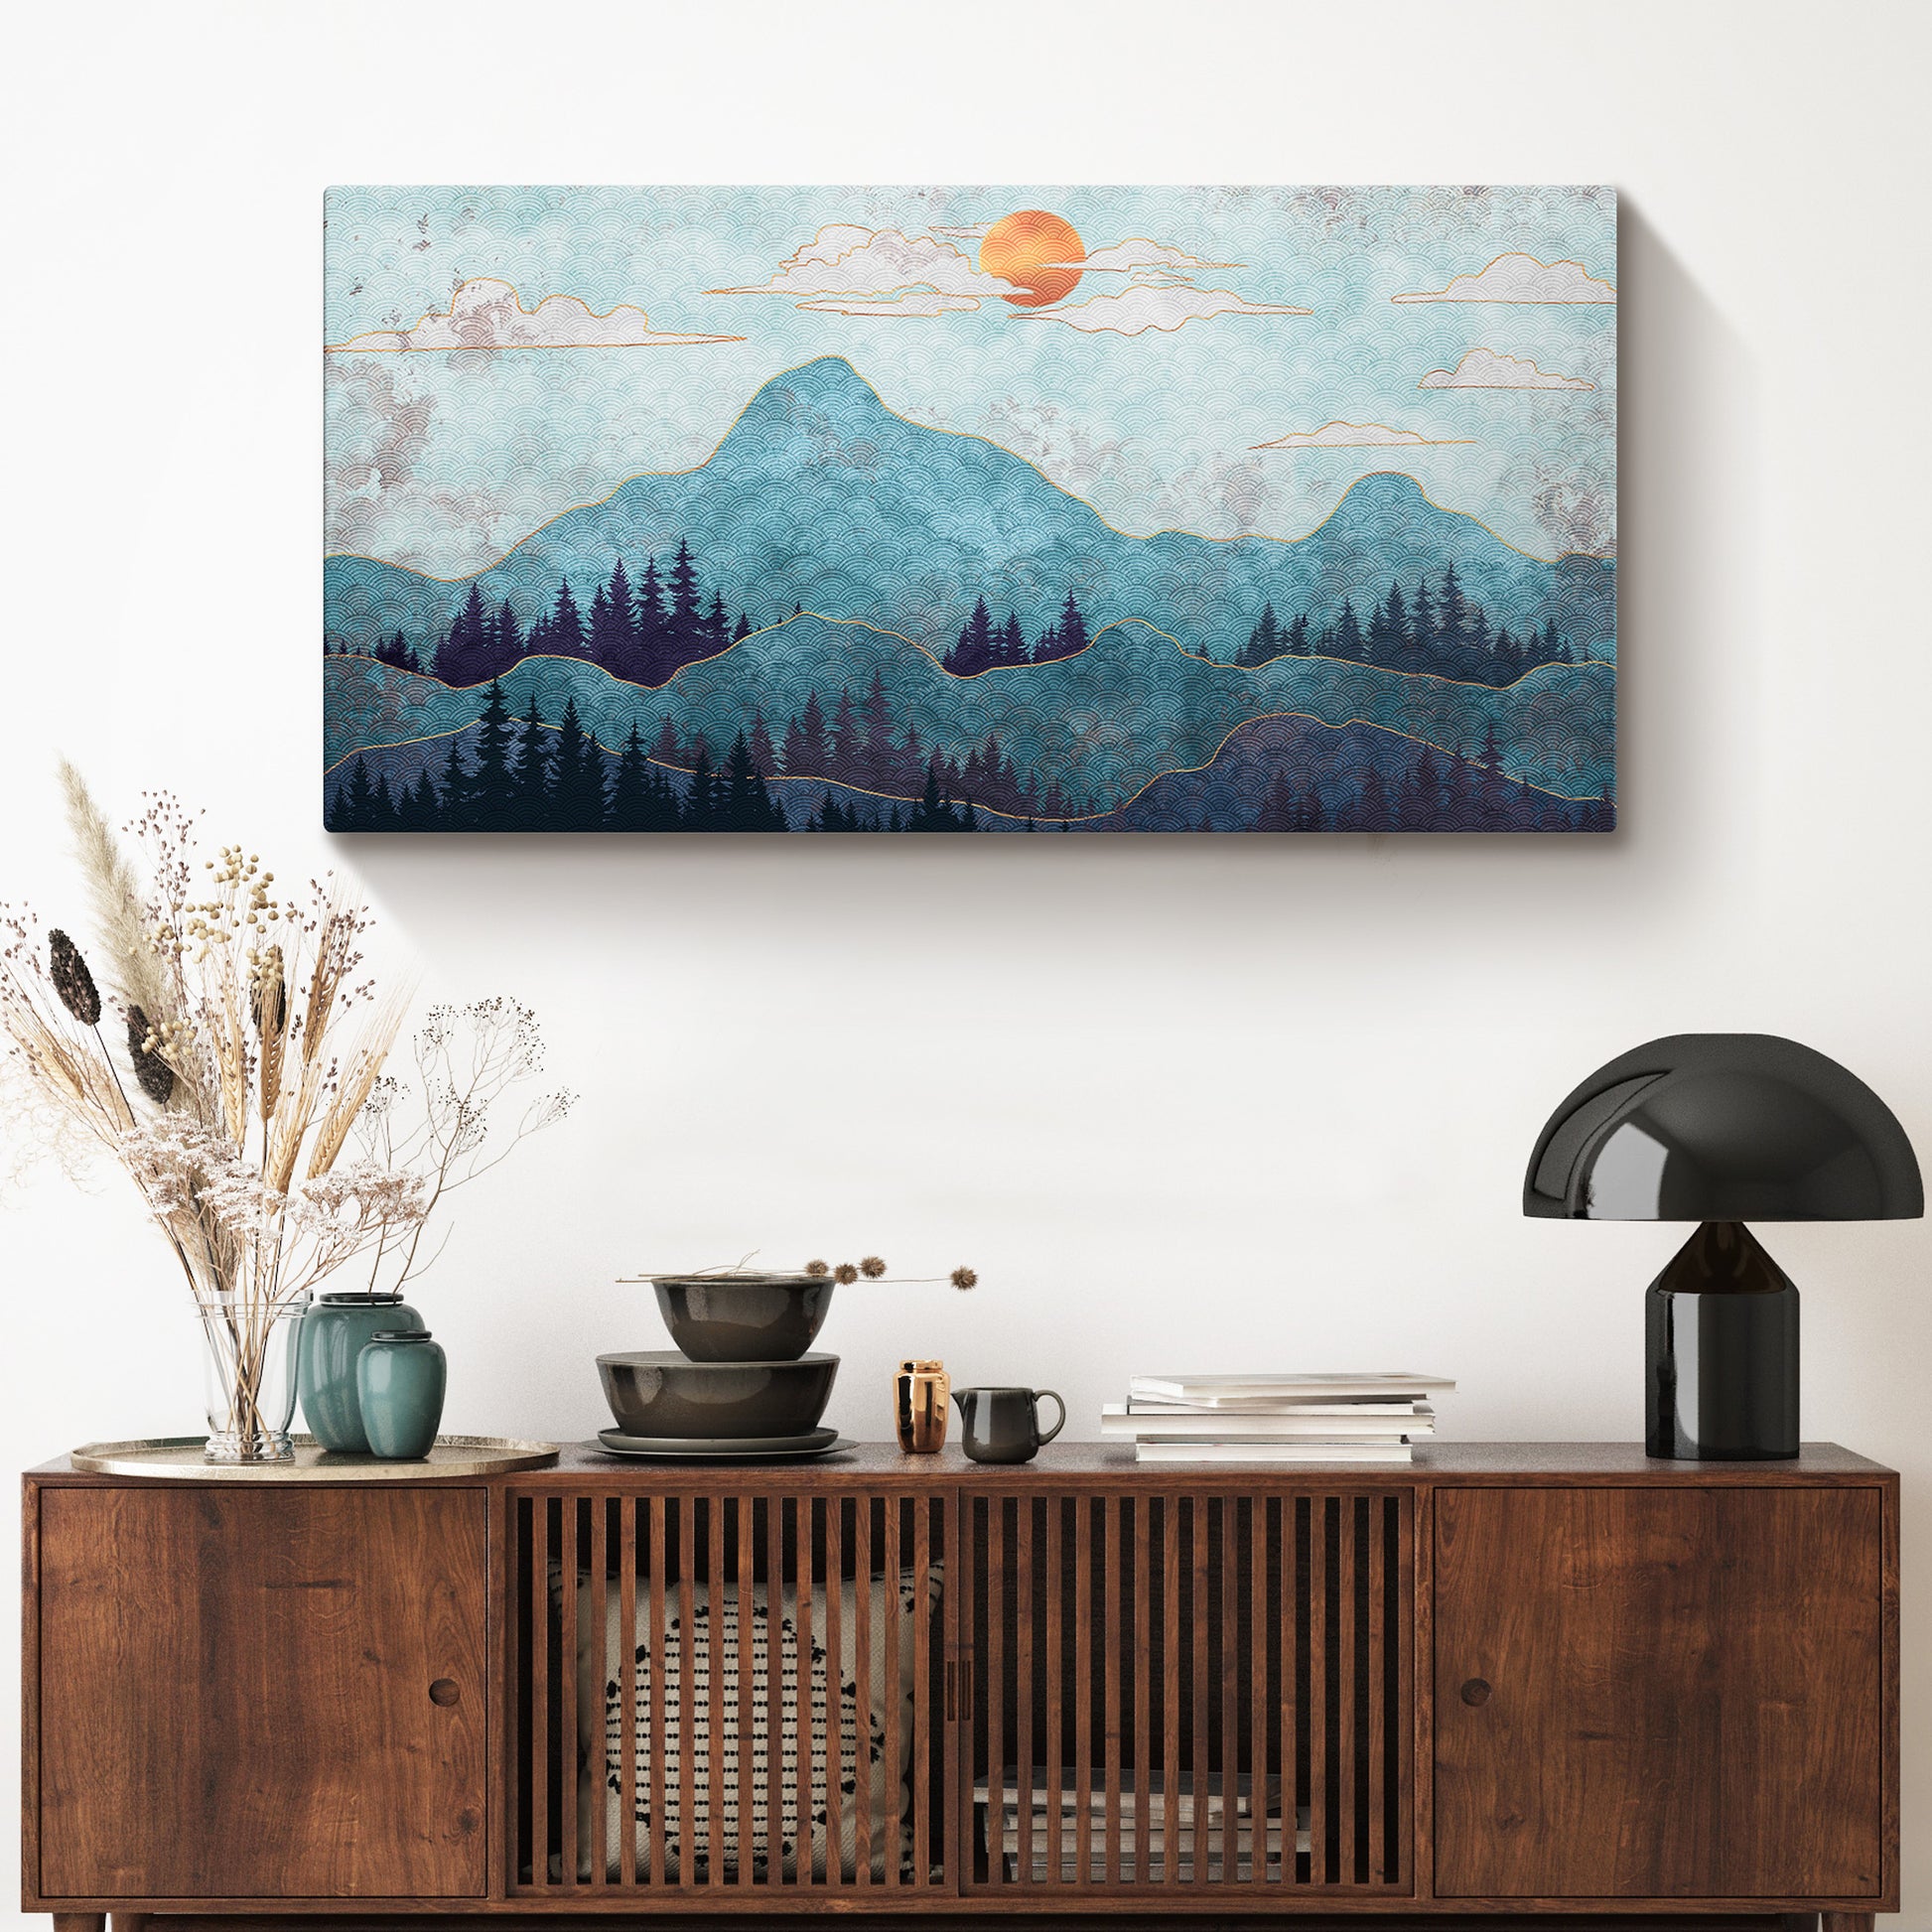 Mountain Hues Canvas Wall Art - Image by Tailored Canvases